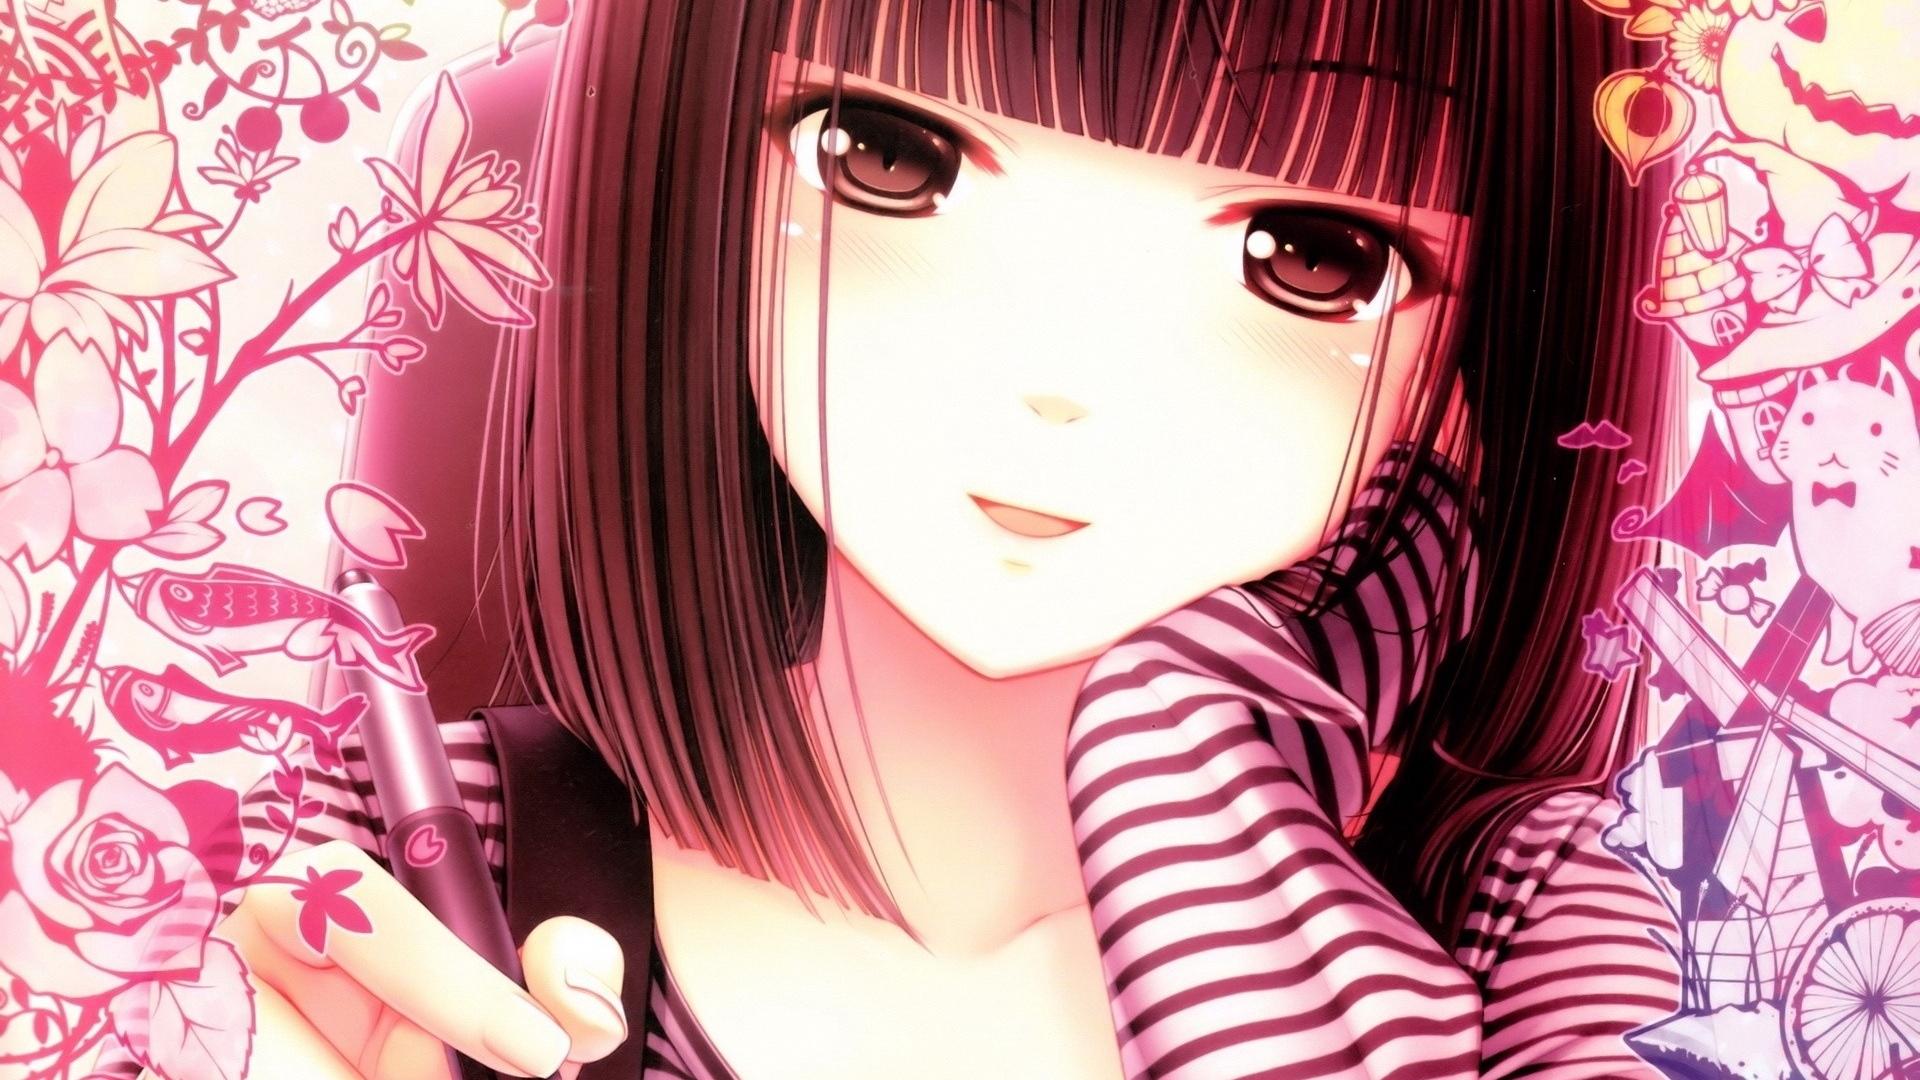 Download wallpaper 1920x1080 anime, girl, face, pen, white, pink full hd, hdtv, fhd, 1080p HD background